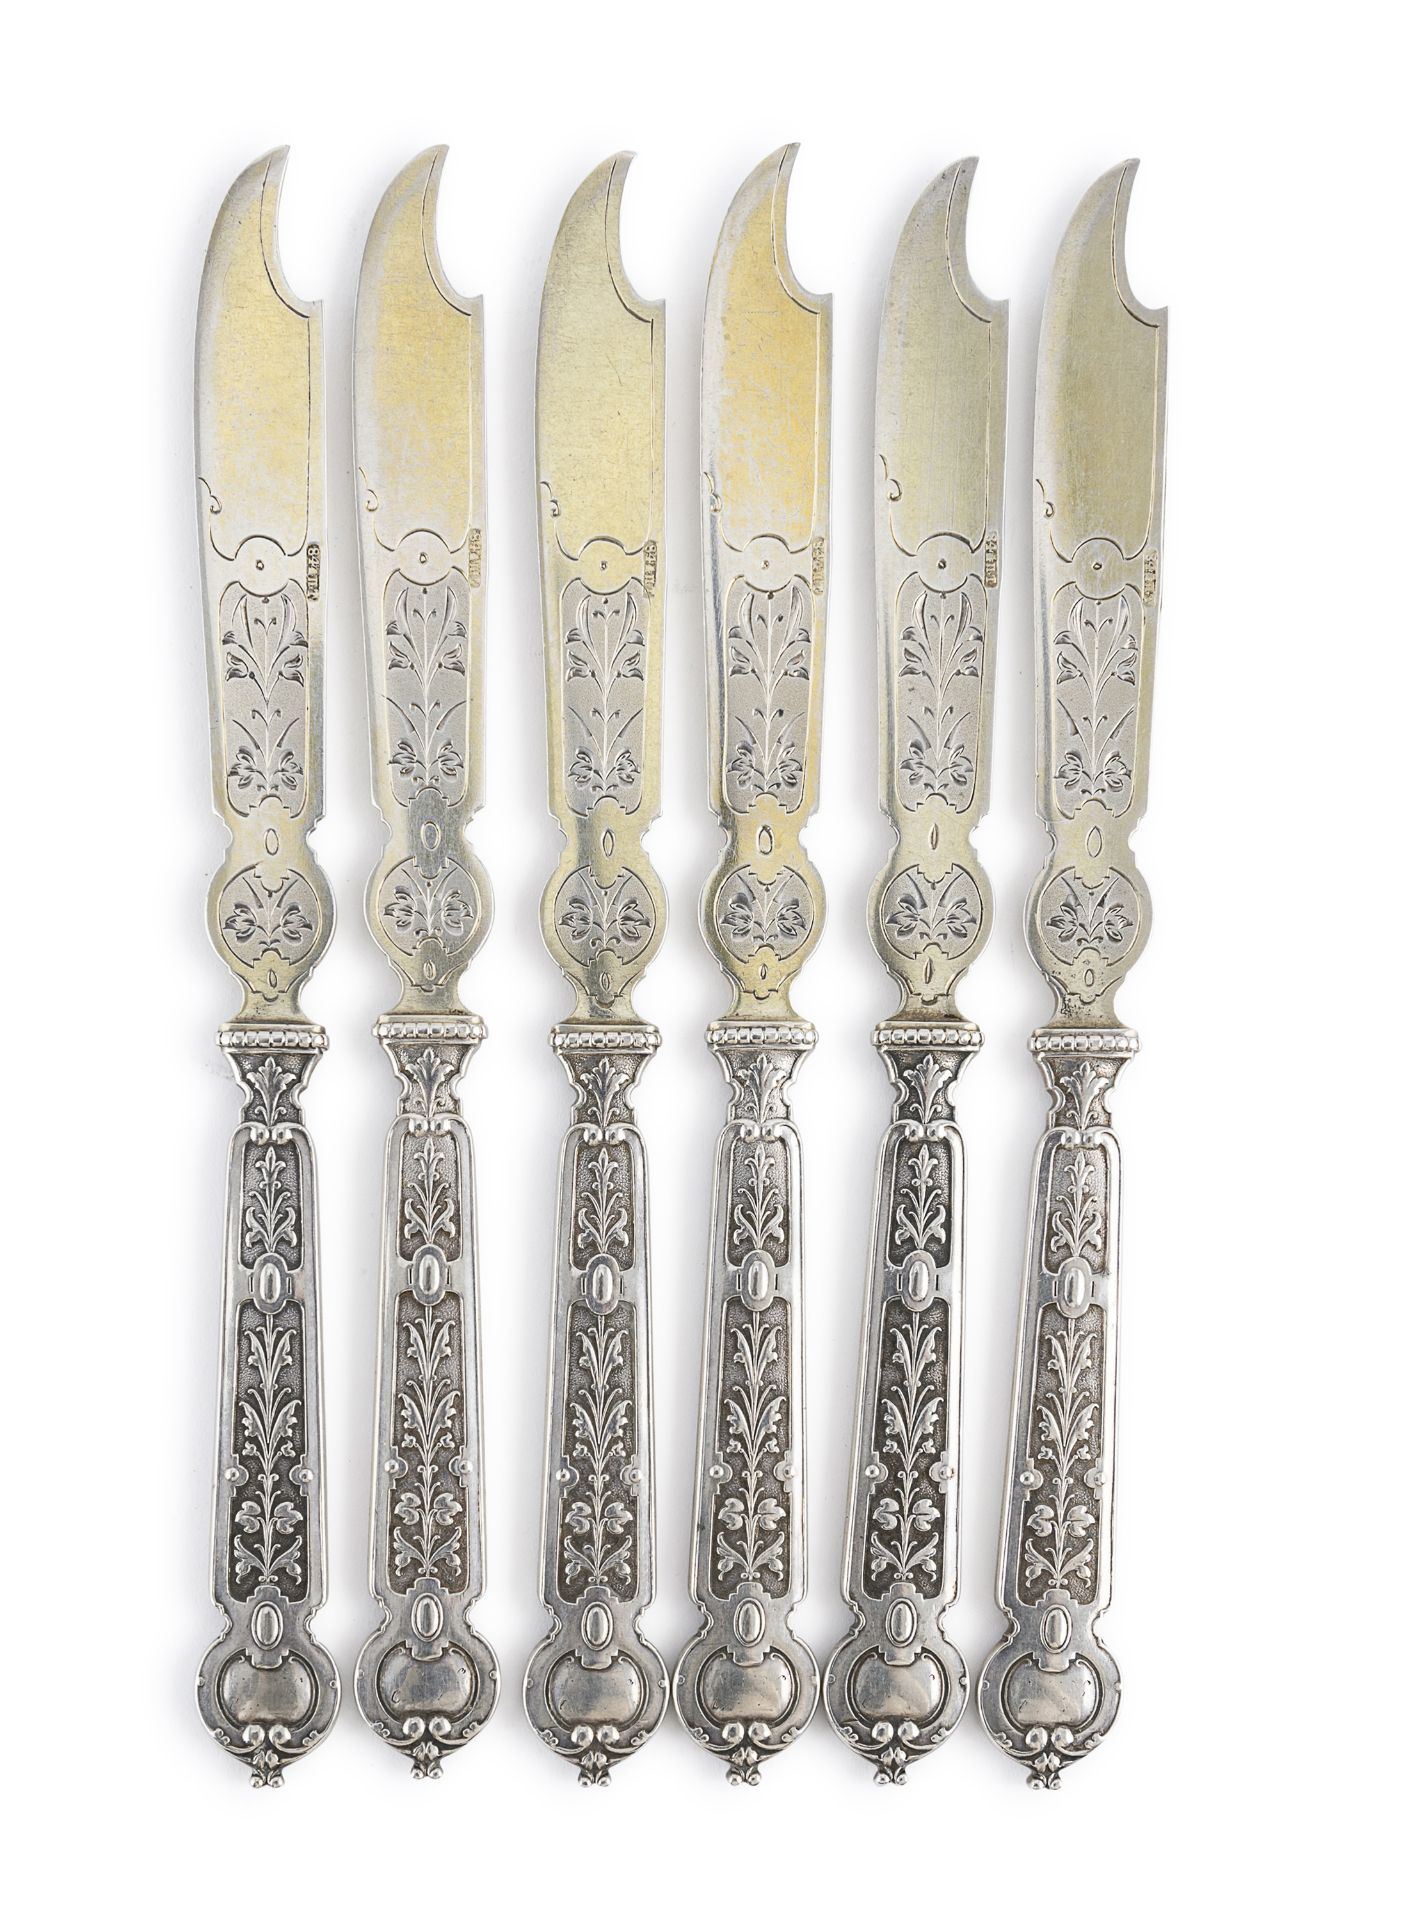 SIX SILVER BUTTER KNIVES AUSTRO-HUNGARIA 19th CENTURY